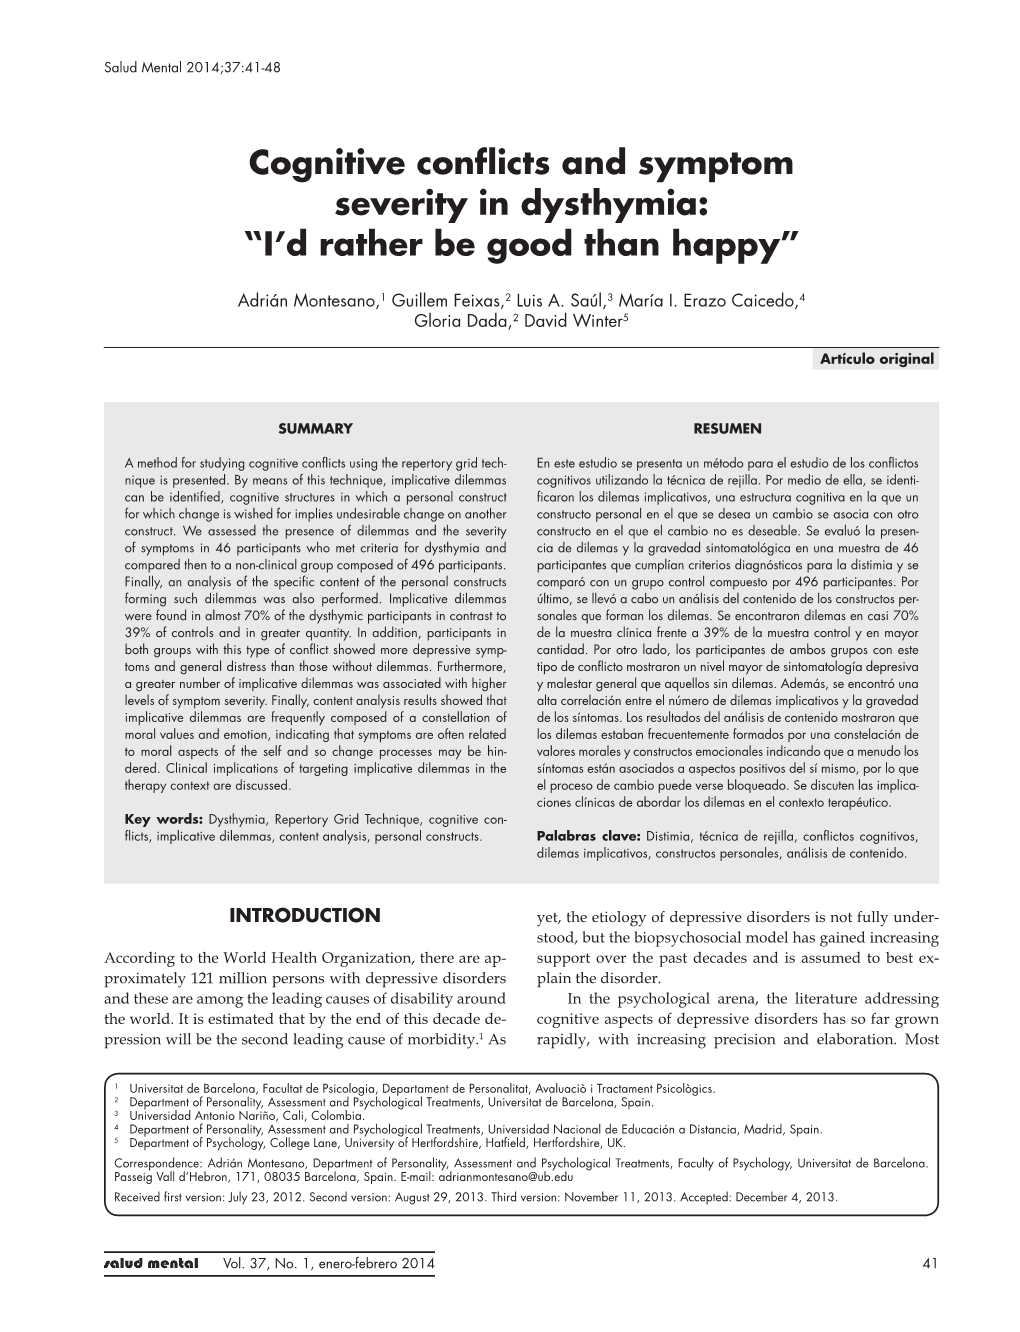 Cognitive Conflicts and Symptom Severity in Dysthymia: “I’D Rather Be Good Than Happy”